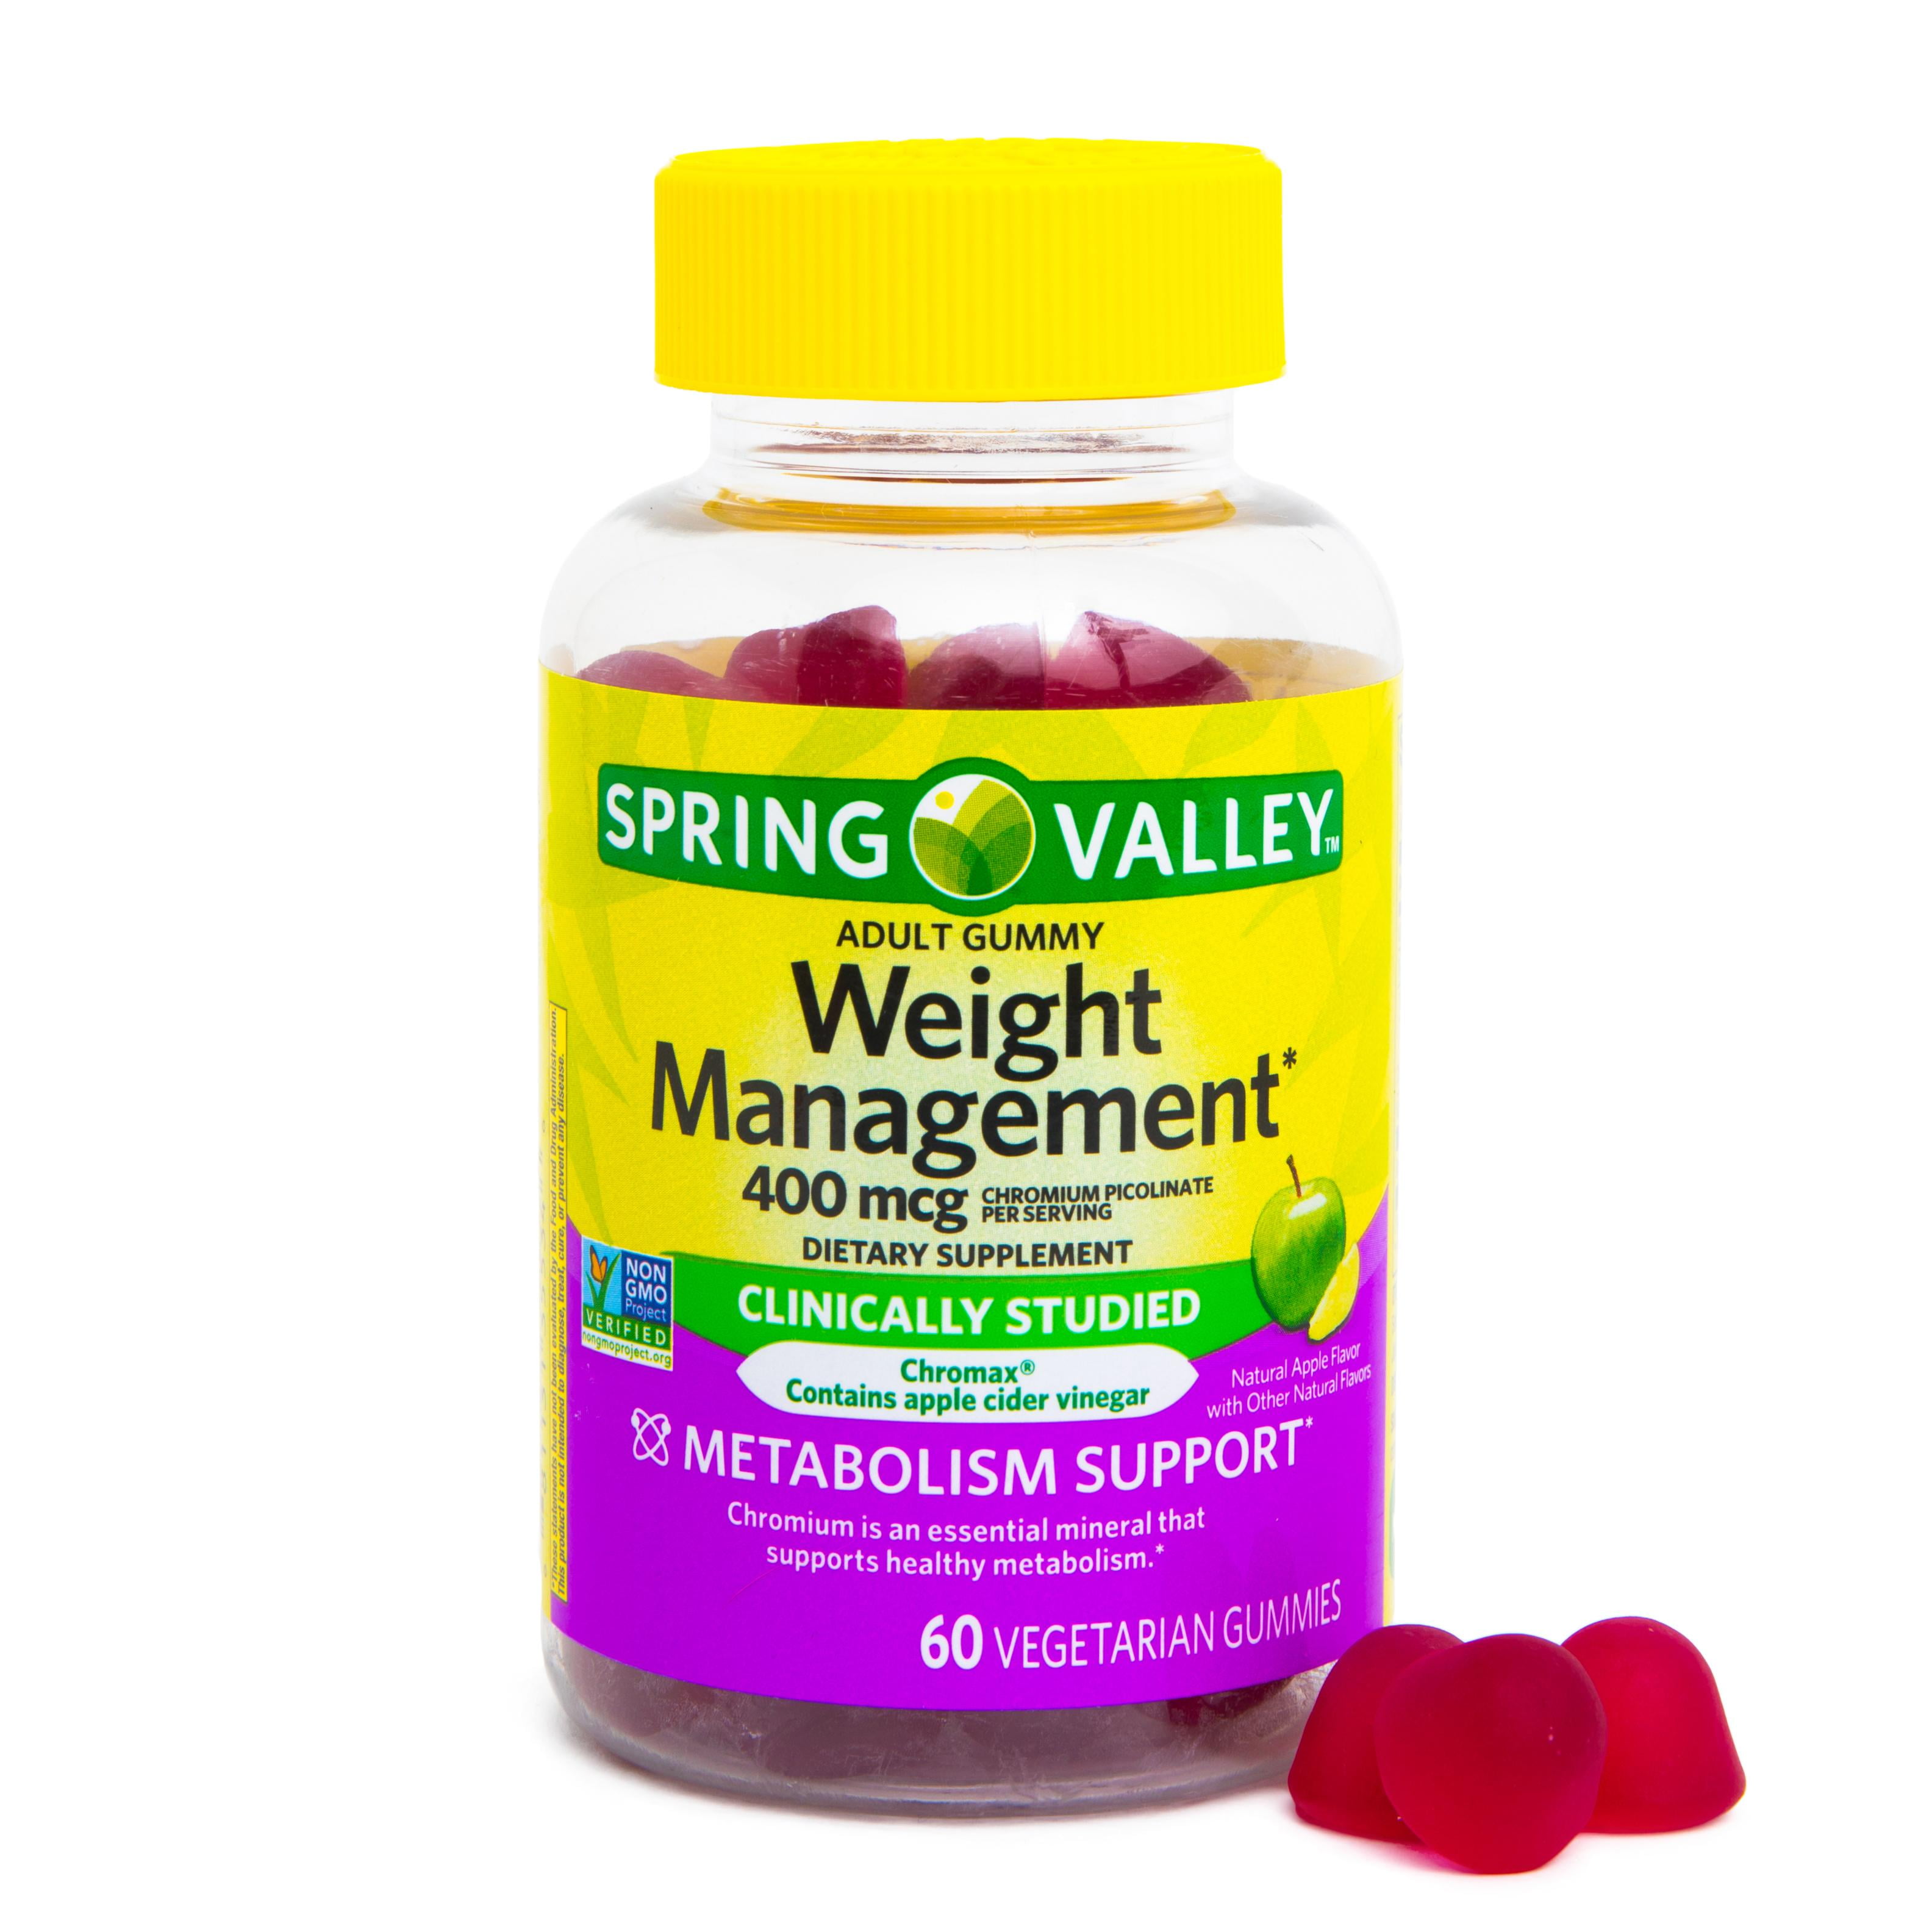 Best Diet Plan for Weight Gain, How do the supplements help?